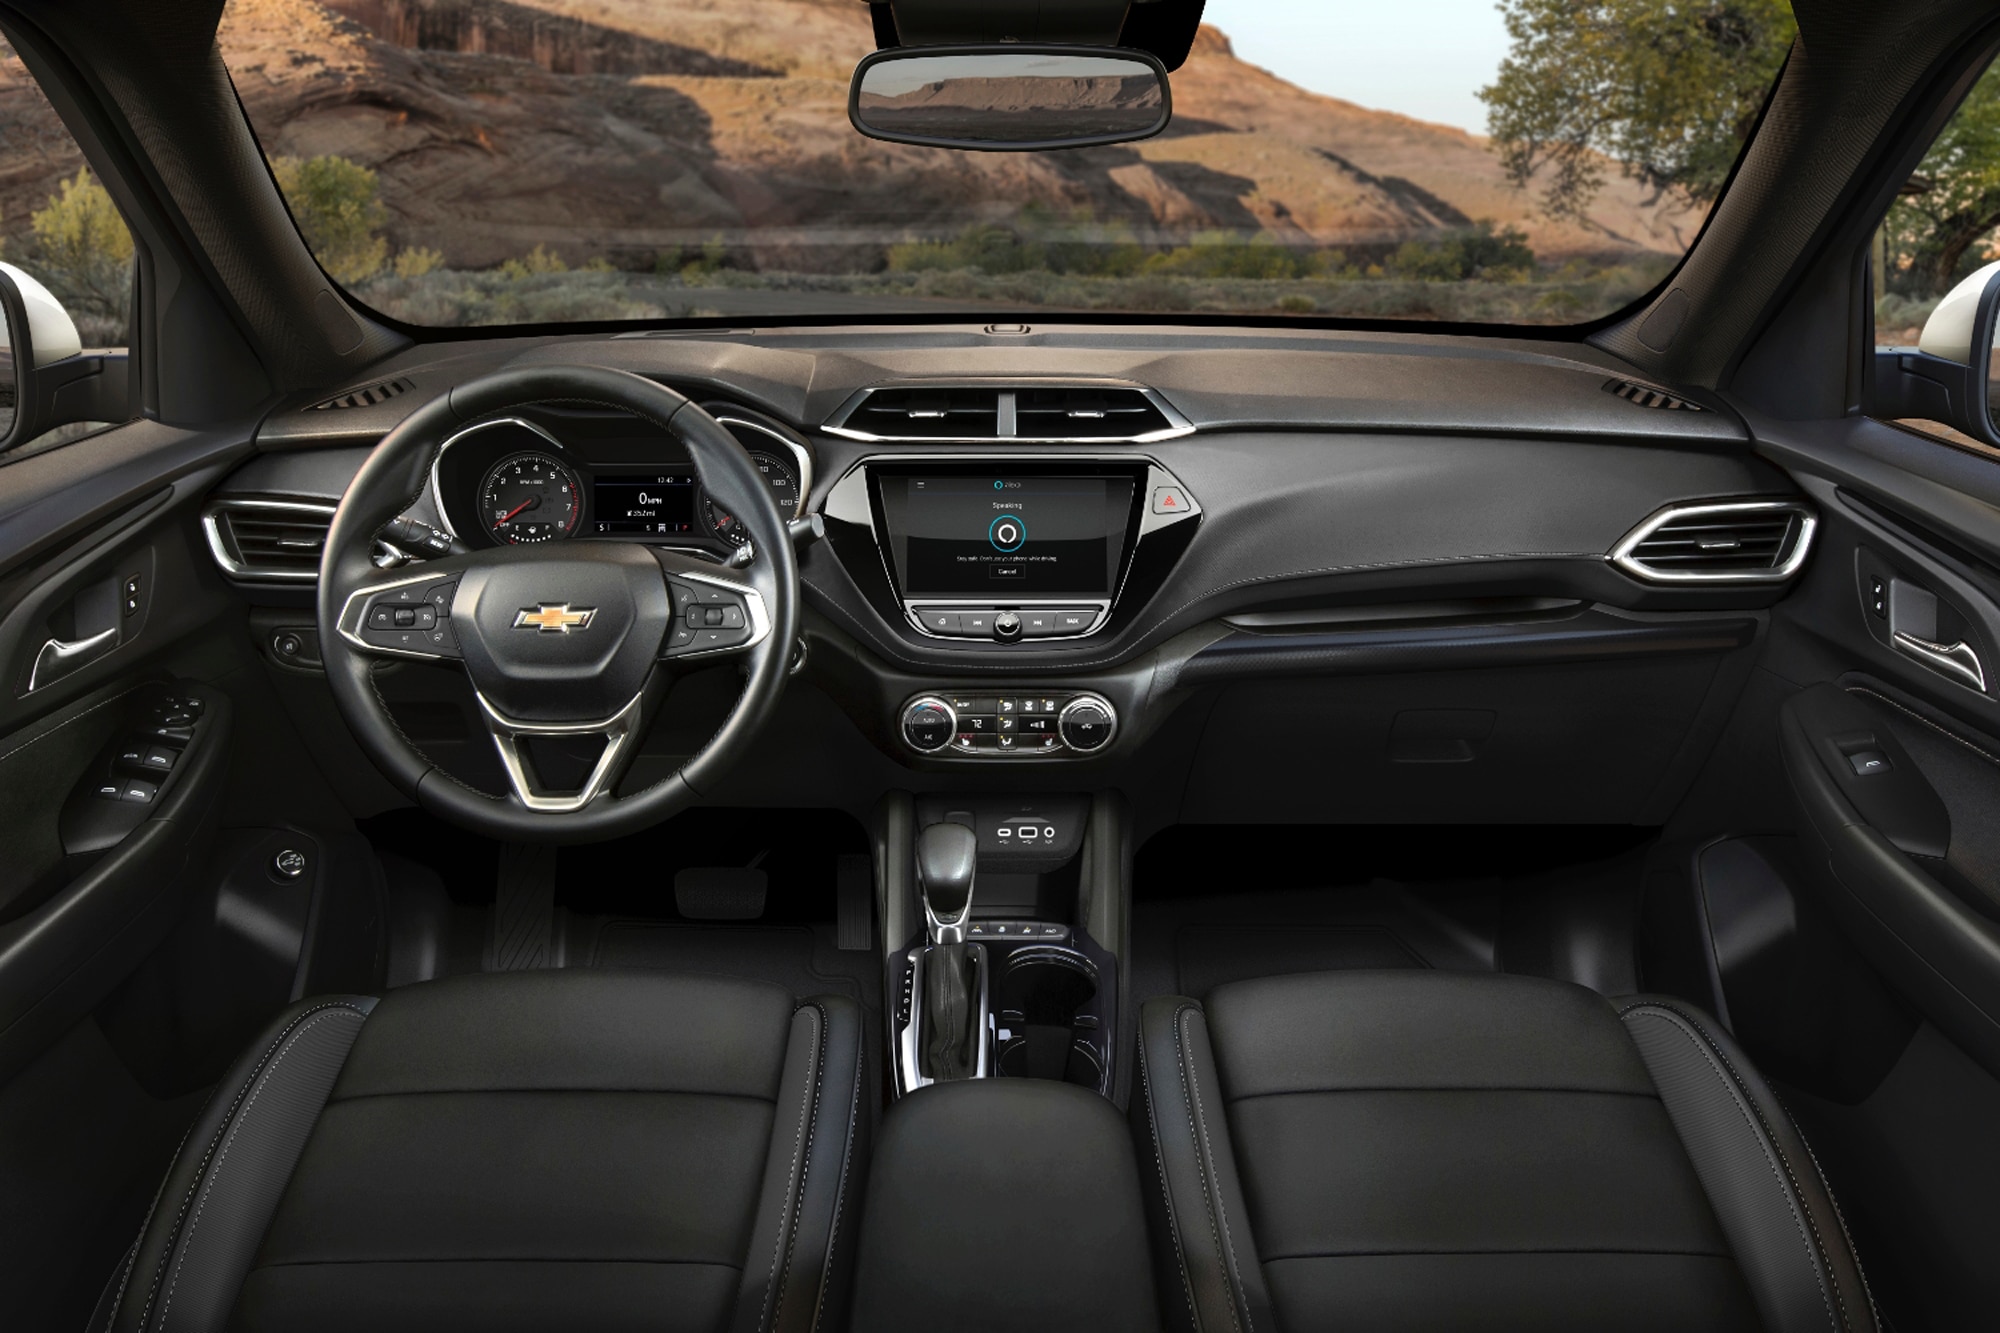 2023 Chevrolet Trailblazer interior dashboard with black leather seats and view of mountains